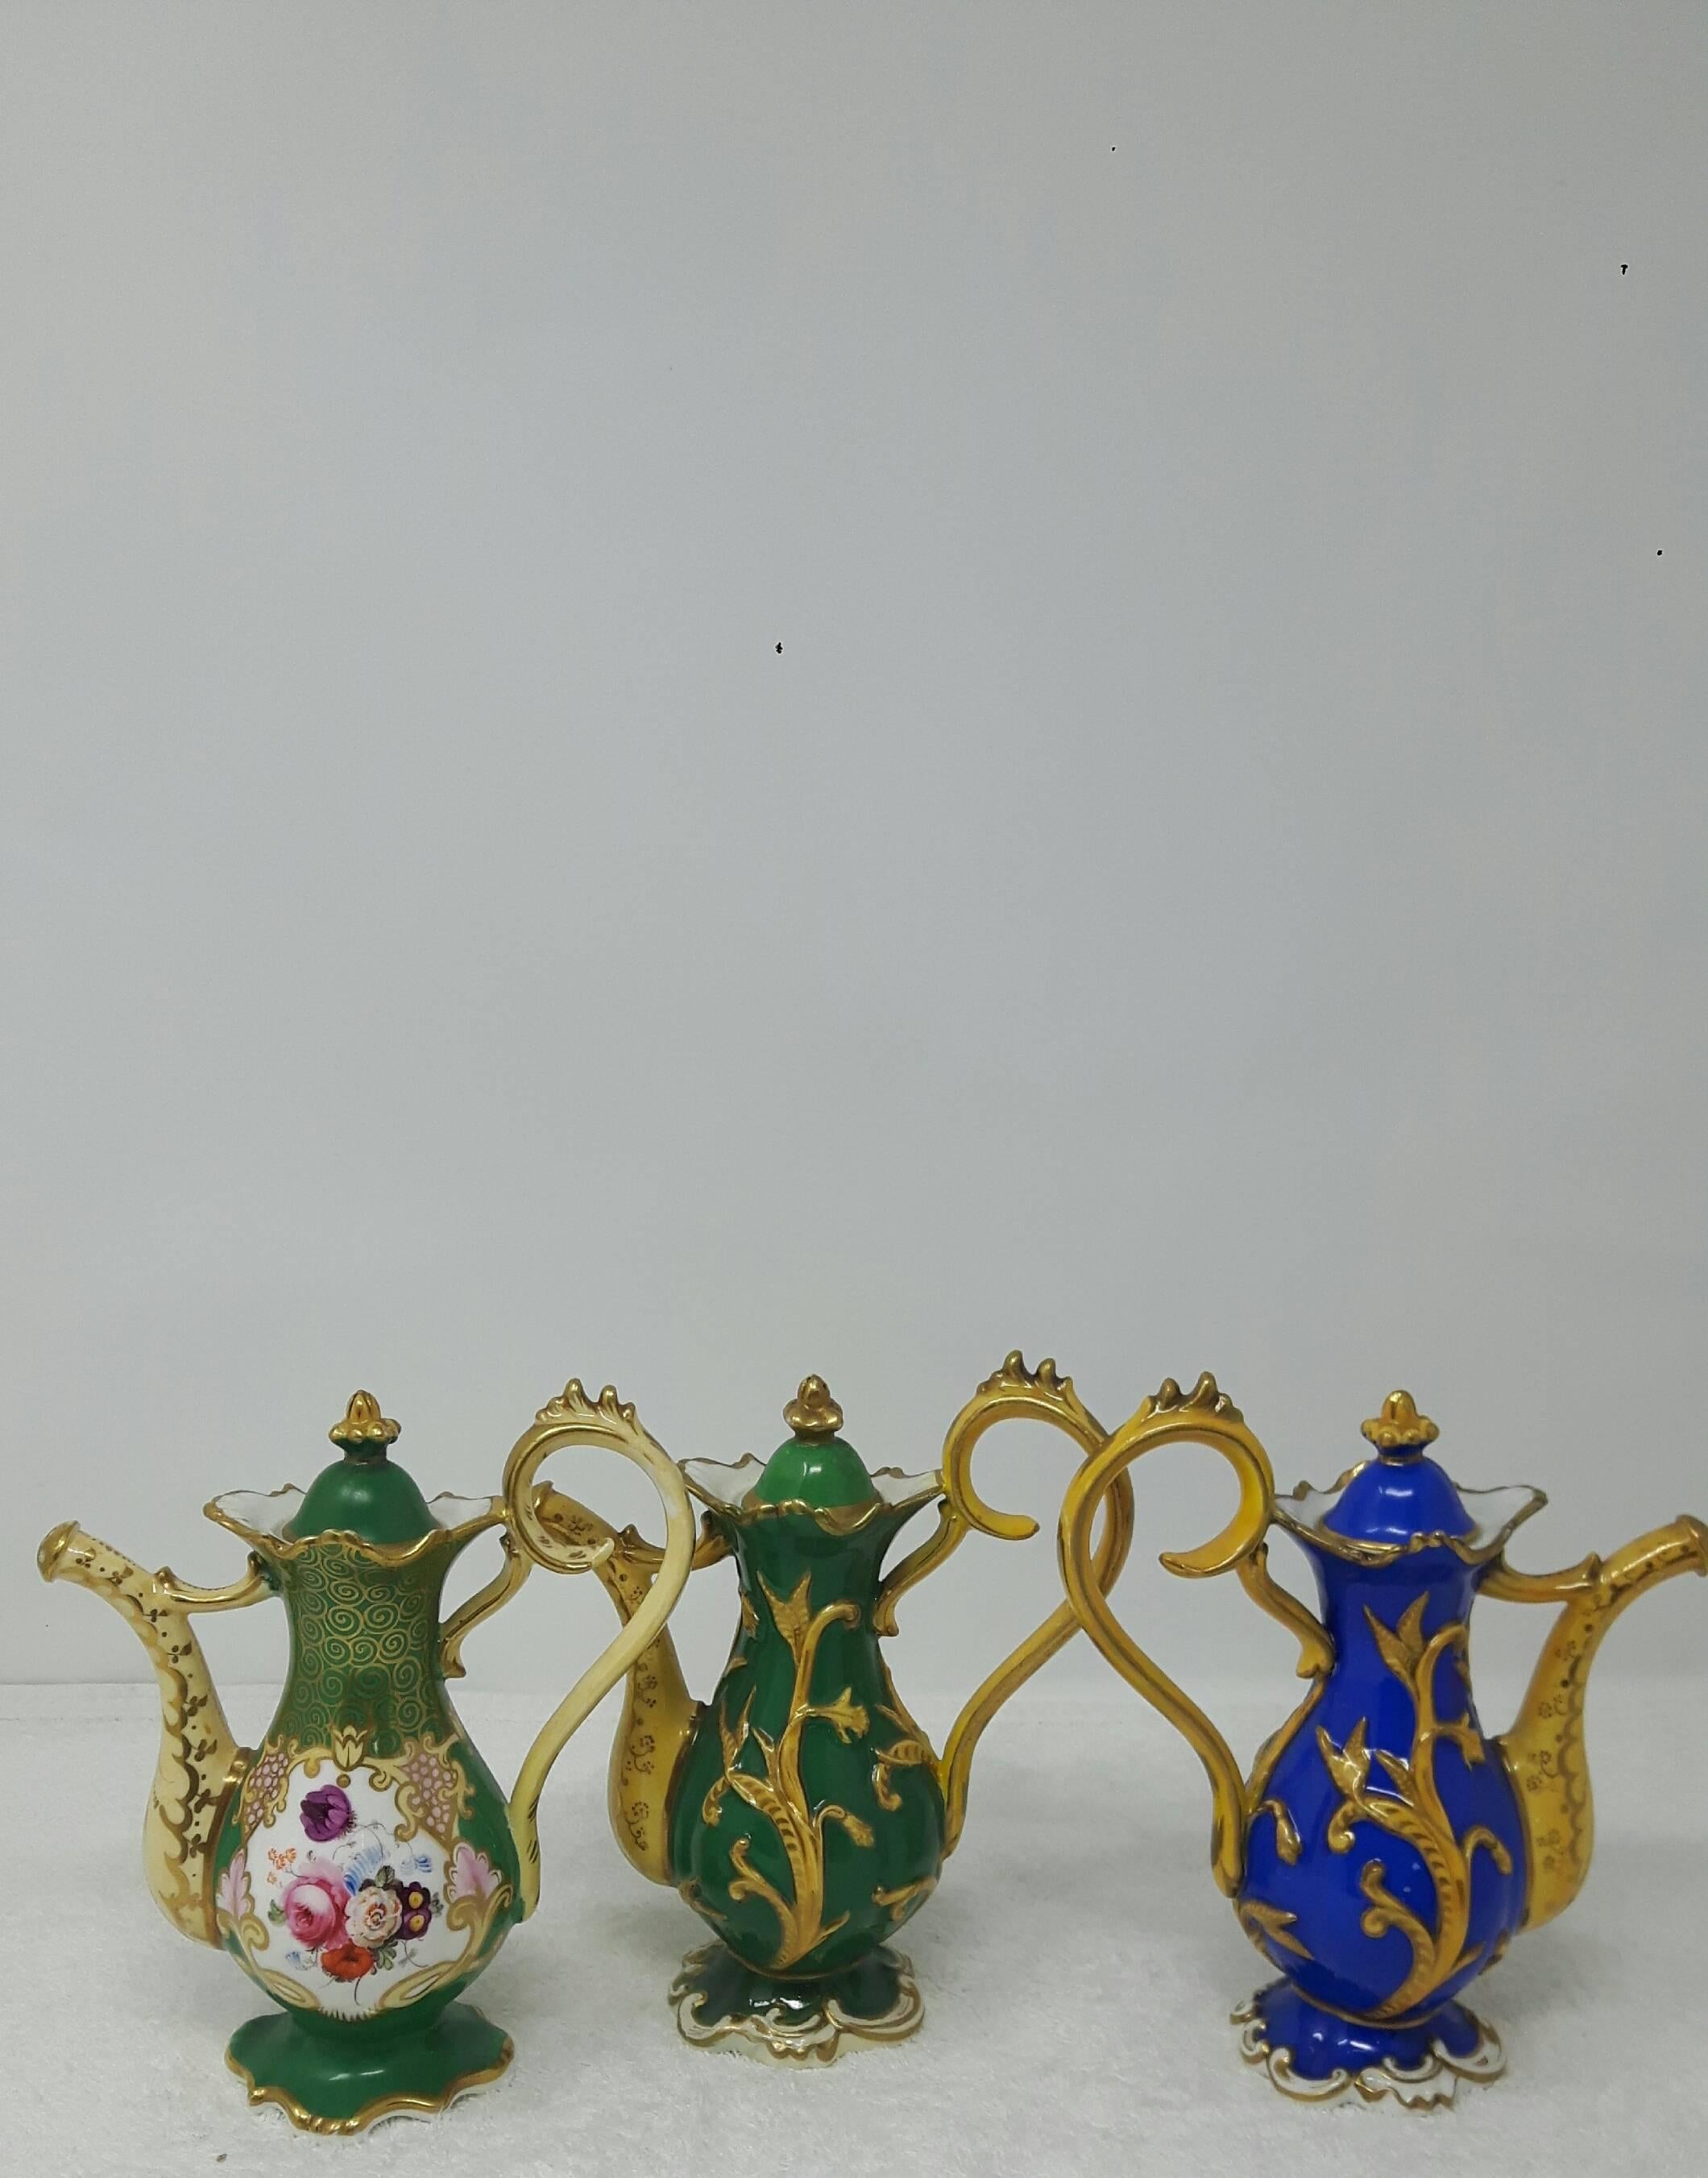 A trio of ewers from the Ridgway factory. The first pot is hand-painted with flower bouquets on a green background with an elaborate handle and spout, the finial is in the shape of a crown

The second coffee pot is identical in shape and colour